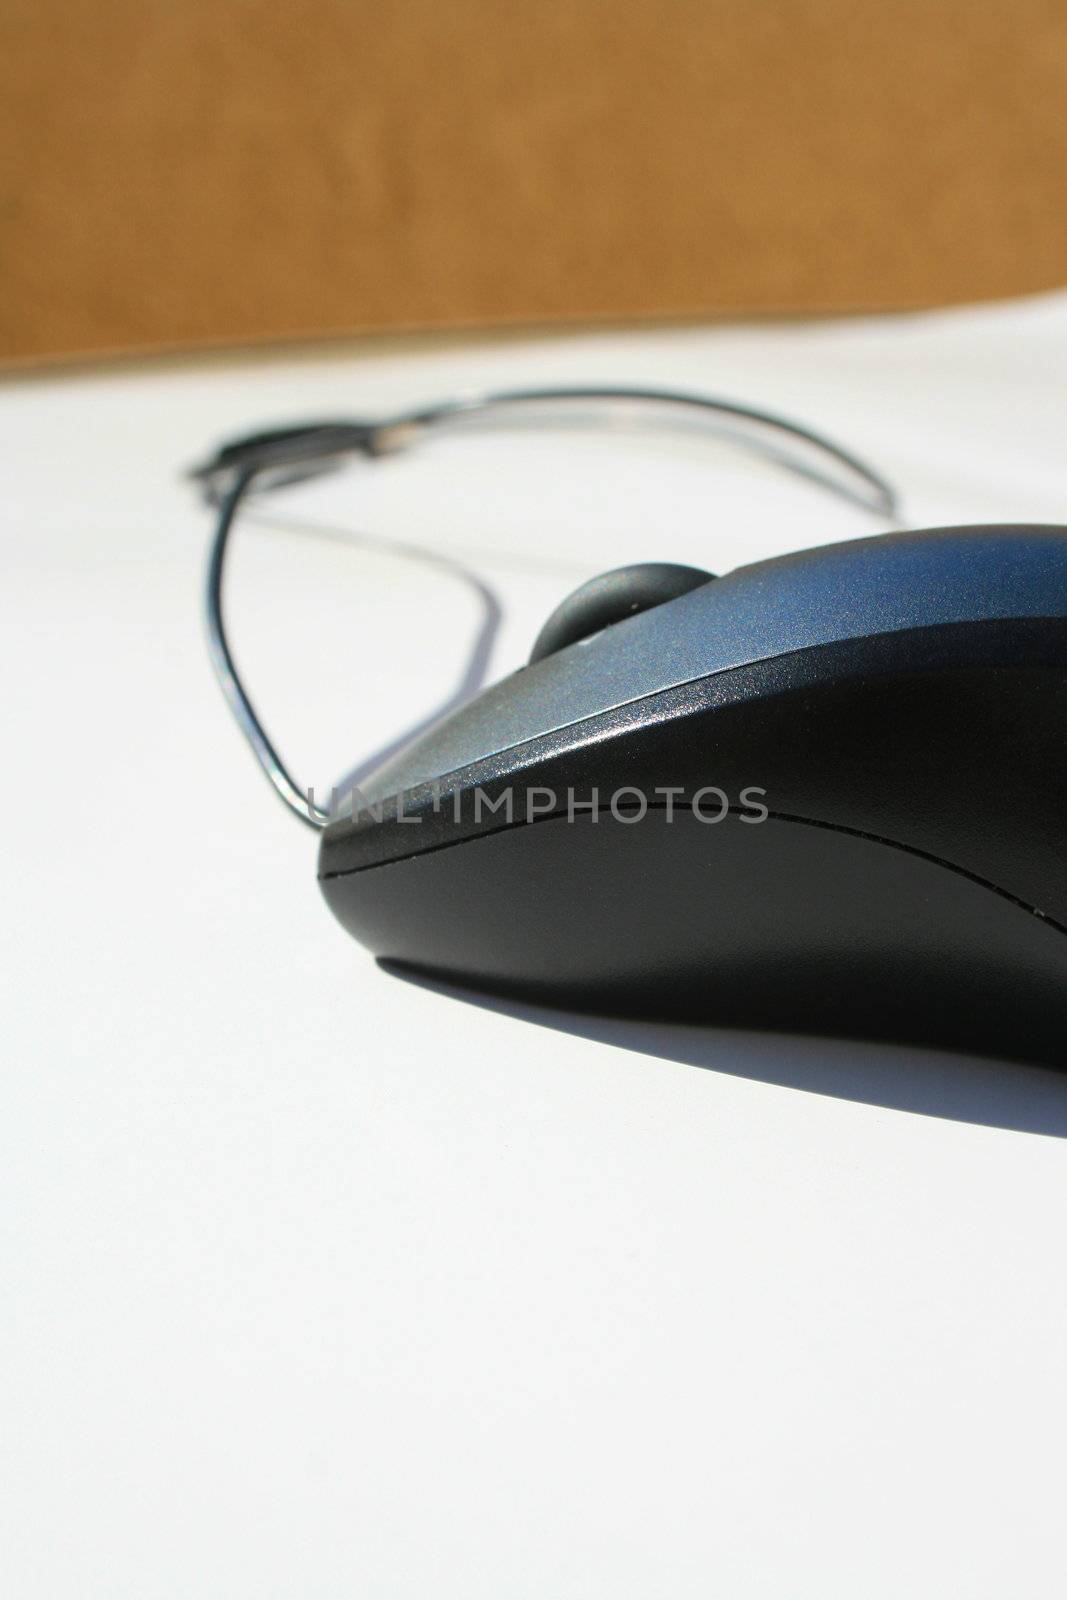 Close up of a computer mouse.
